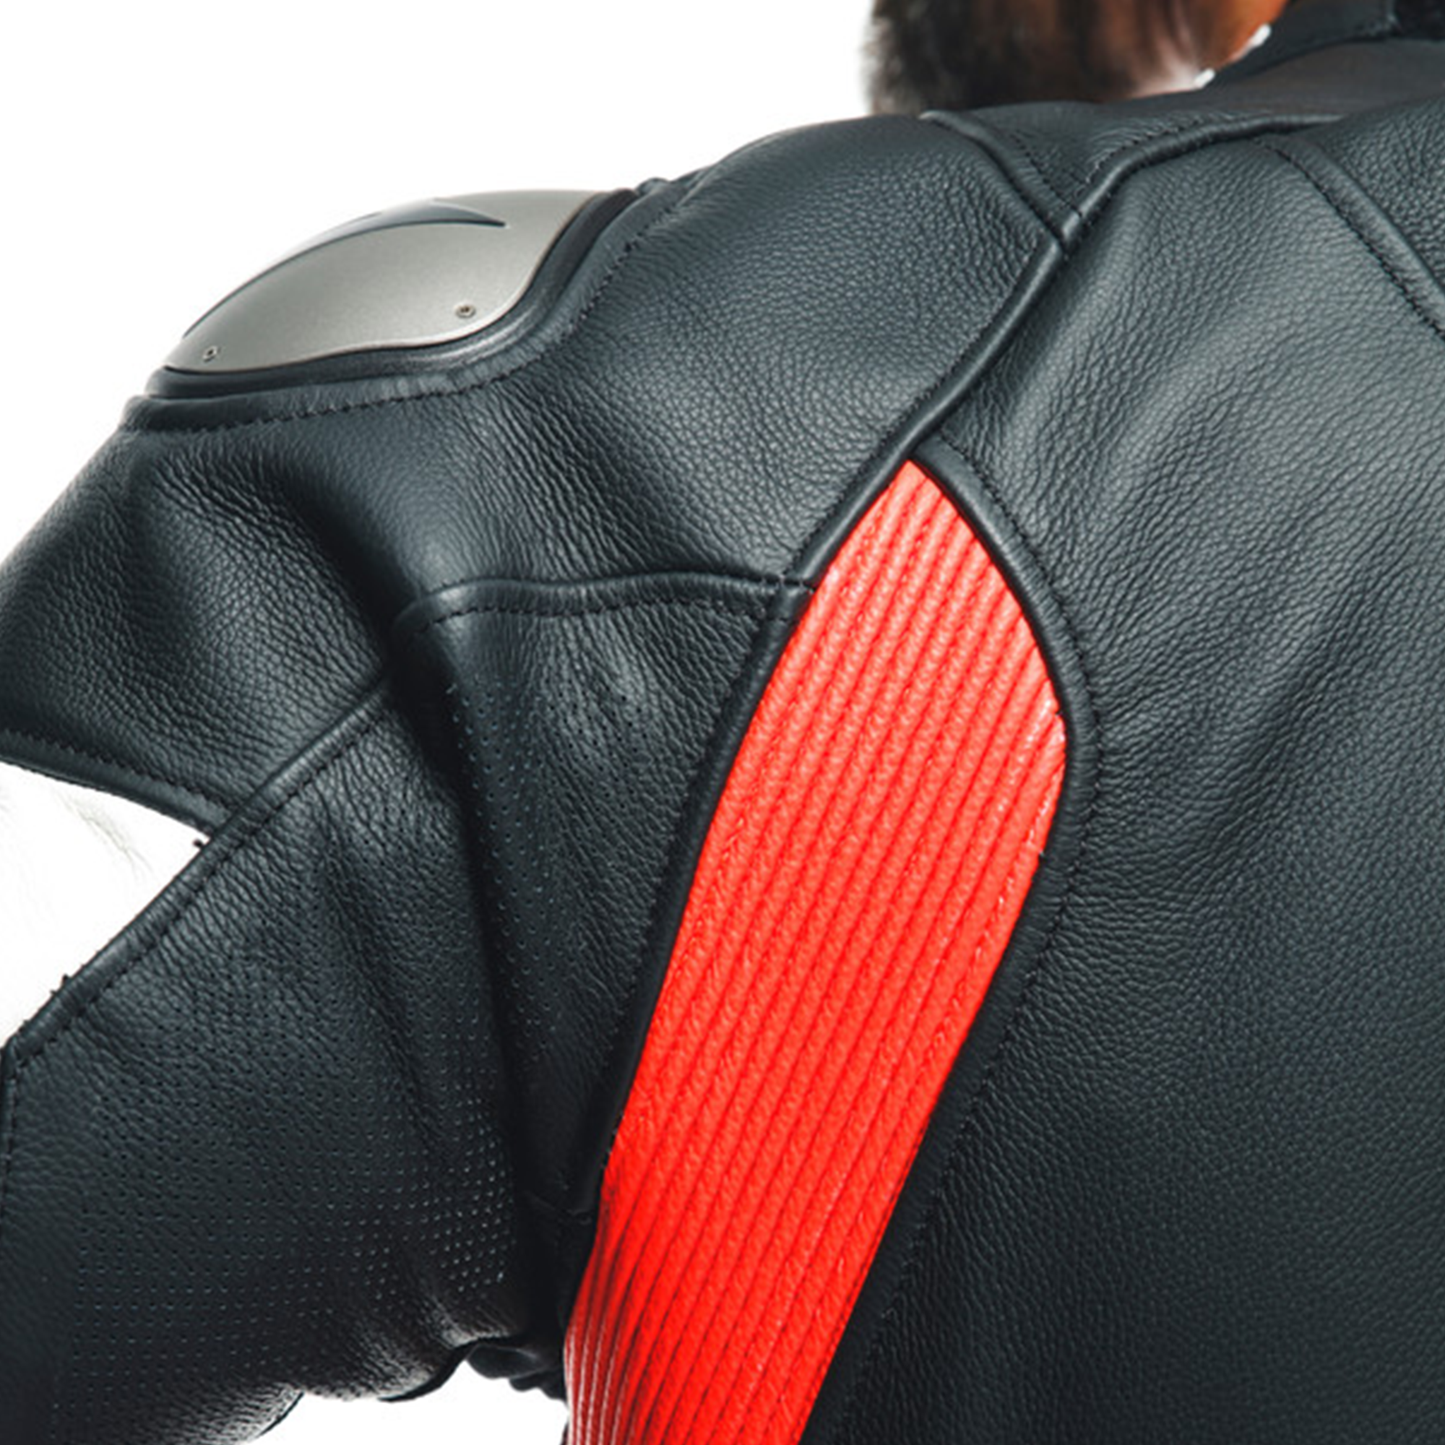 Dainese Tosa 1 Piece Leather Suit Perf. - Black/Flo Red/White